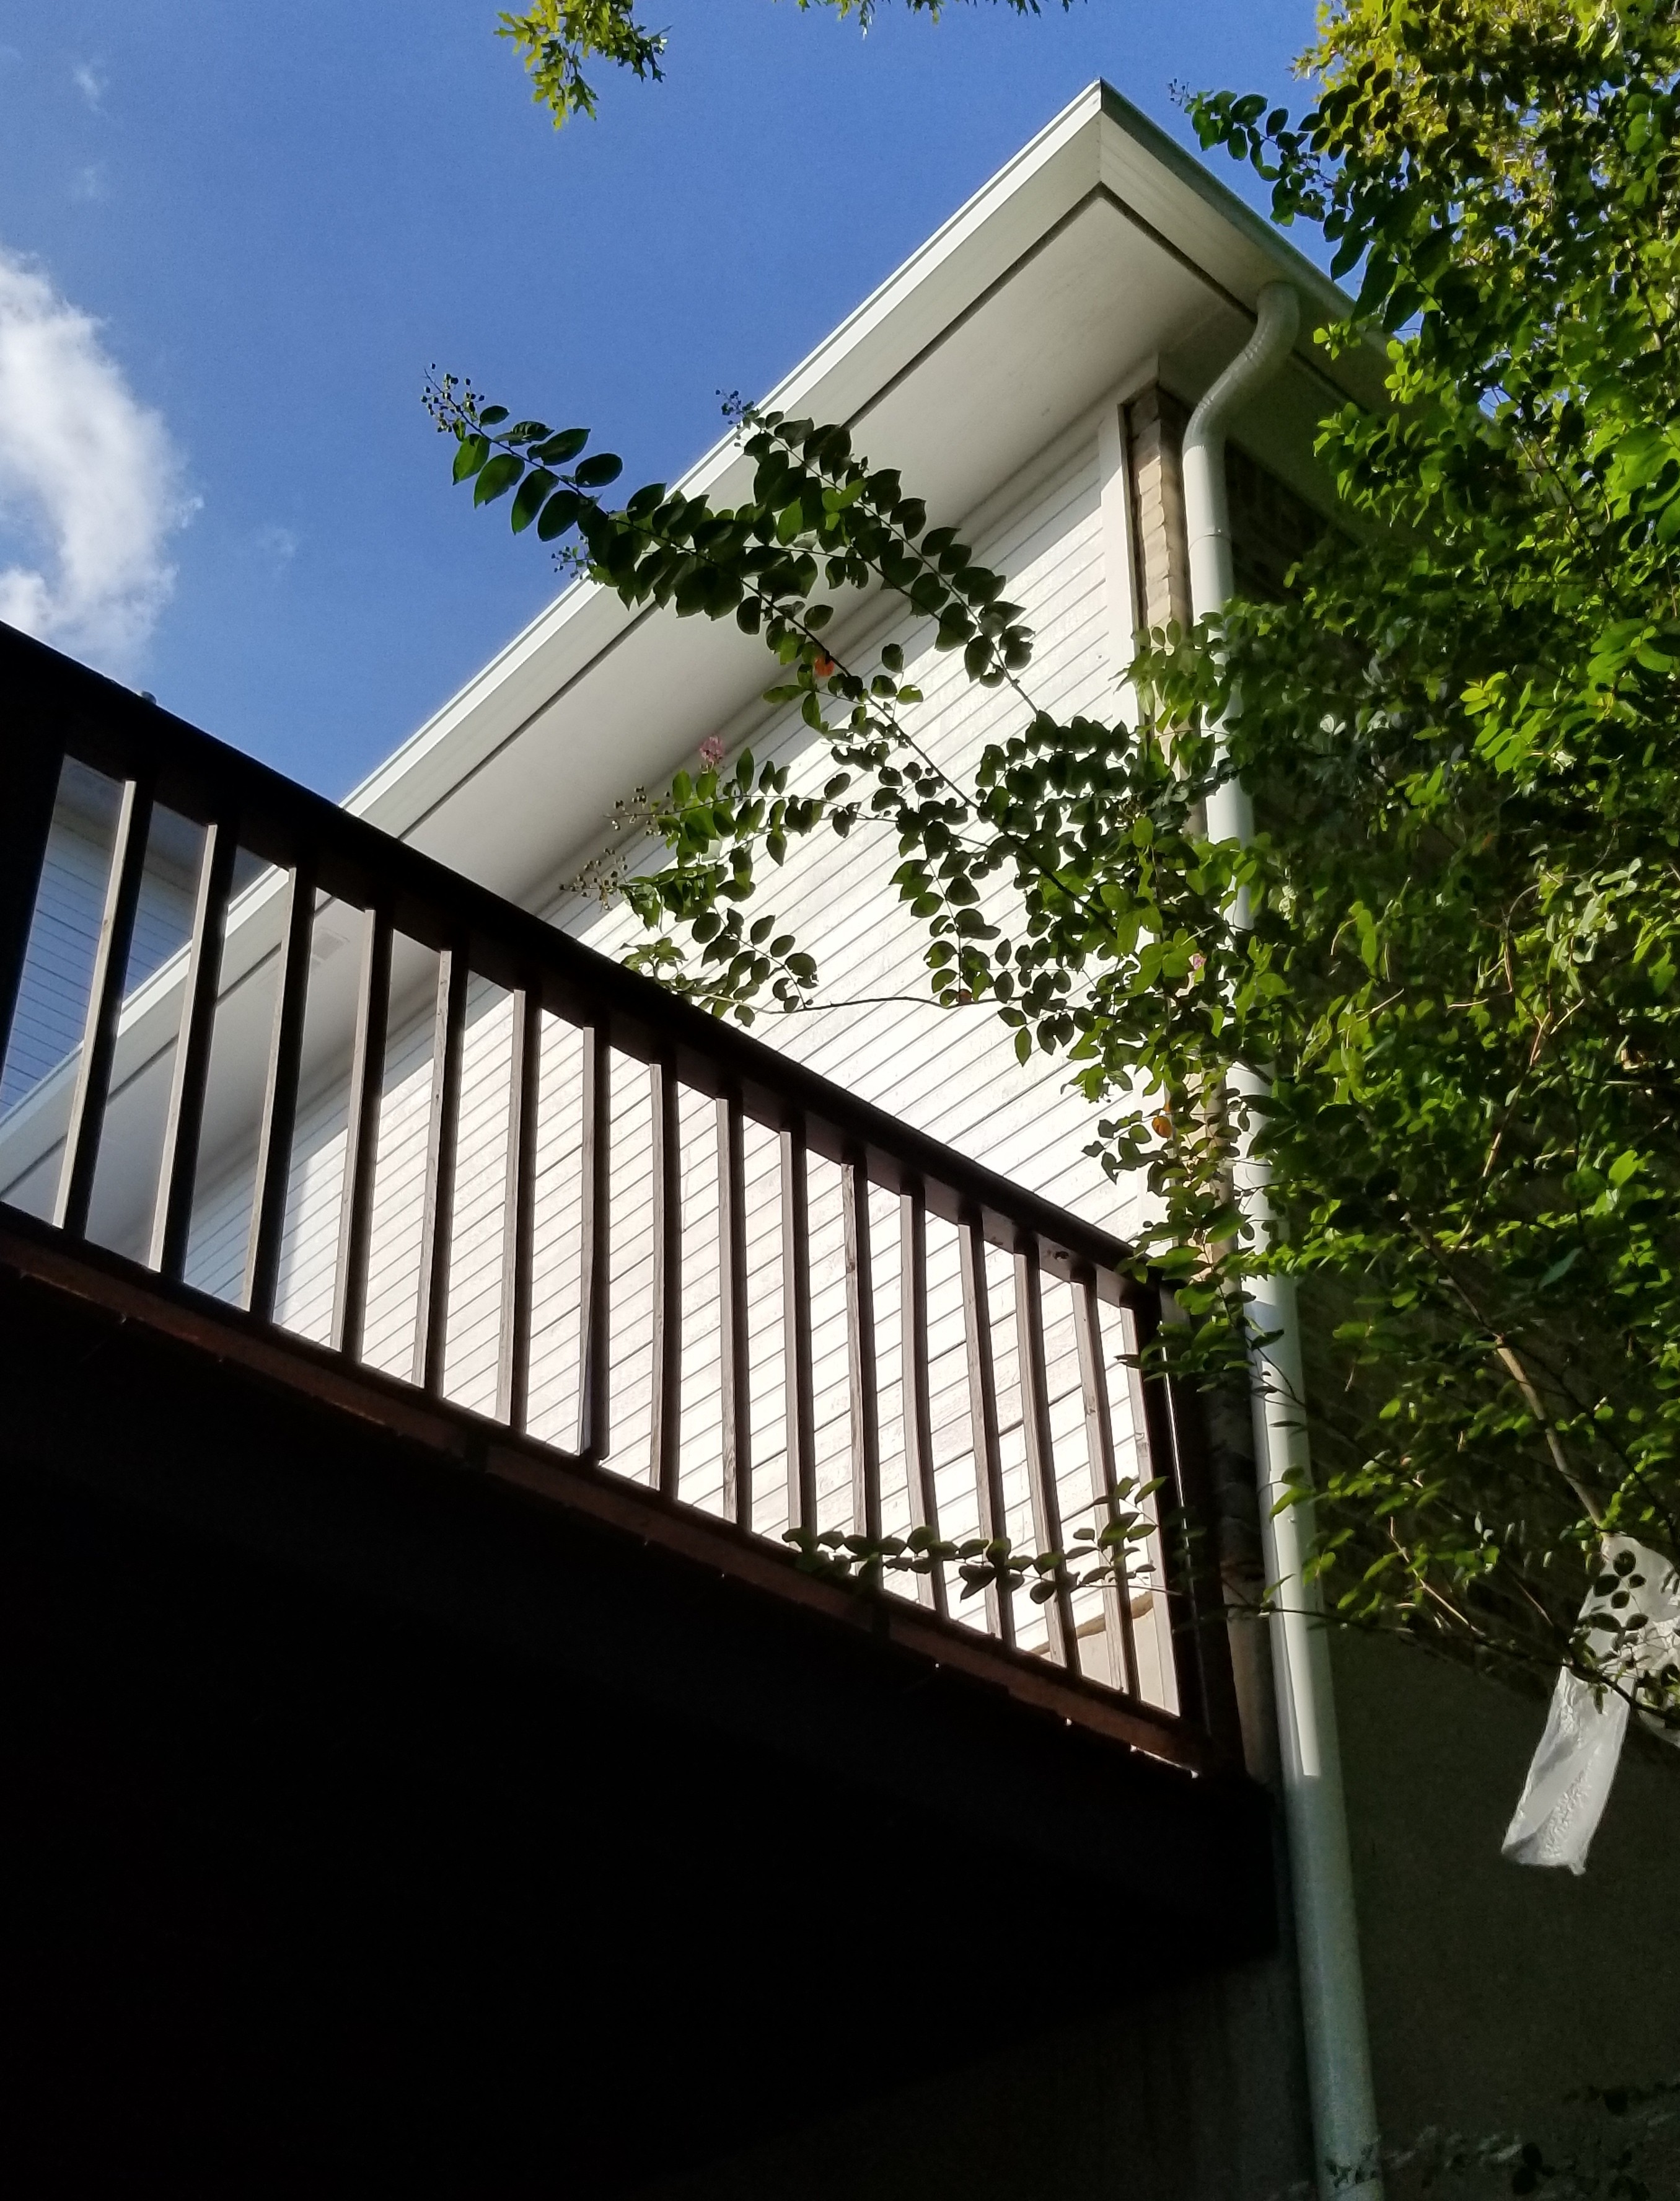 ATX Seamless Gutters & Roofing Photo